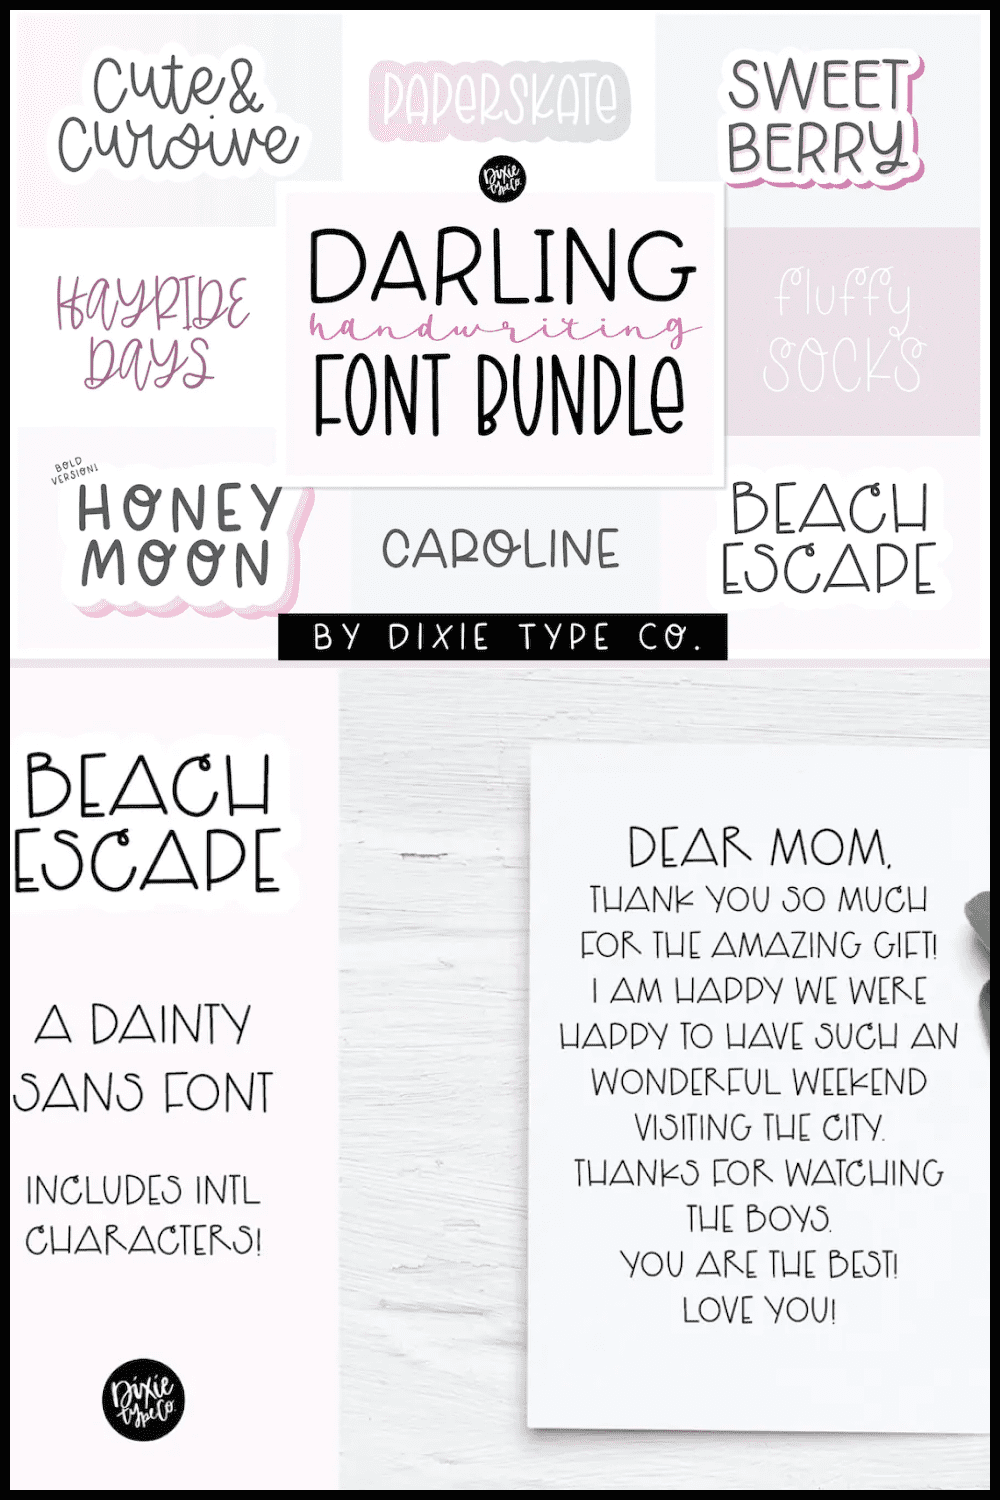 This is a perfect font for diary.